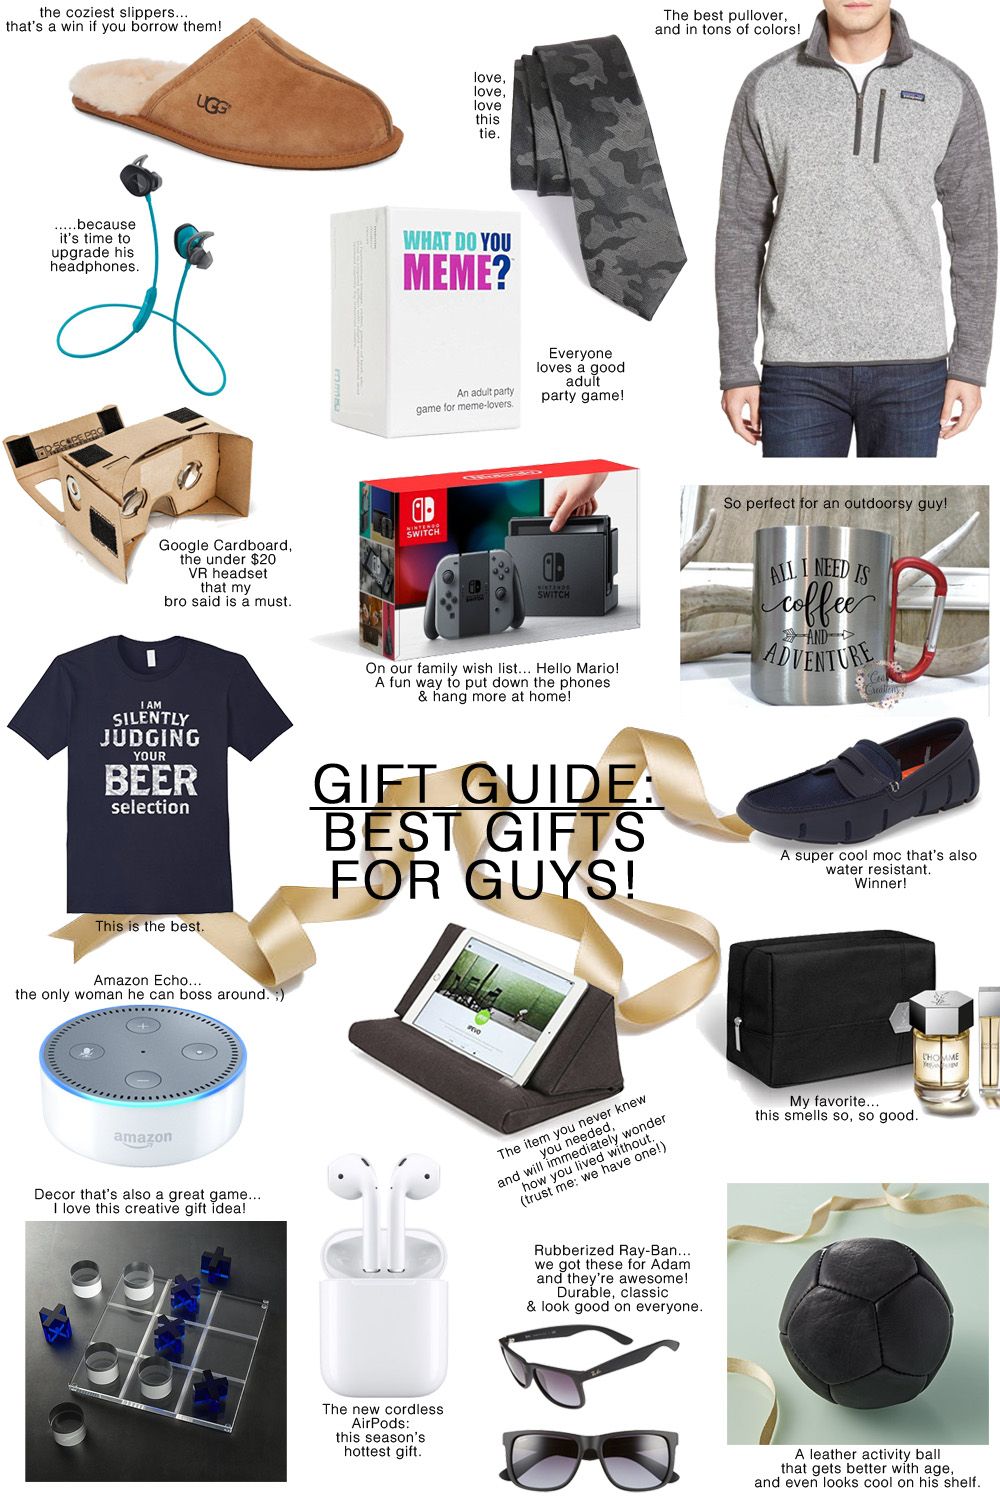 Best Gifts For Guys | Life | The Modern Savvy -the blog